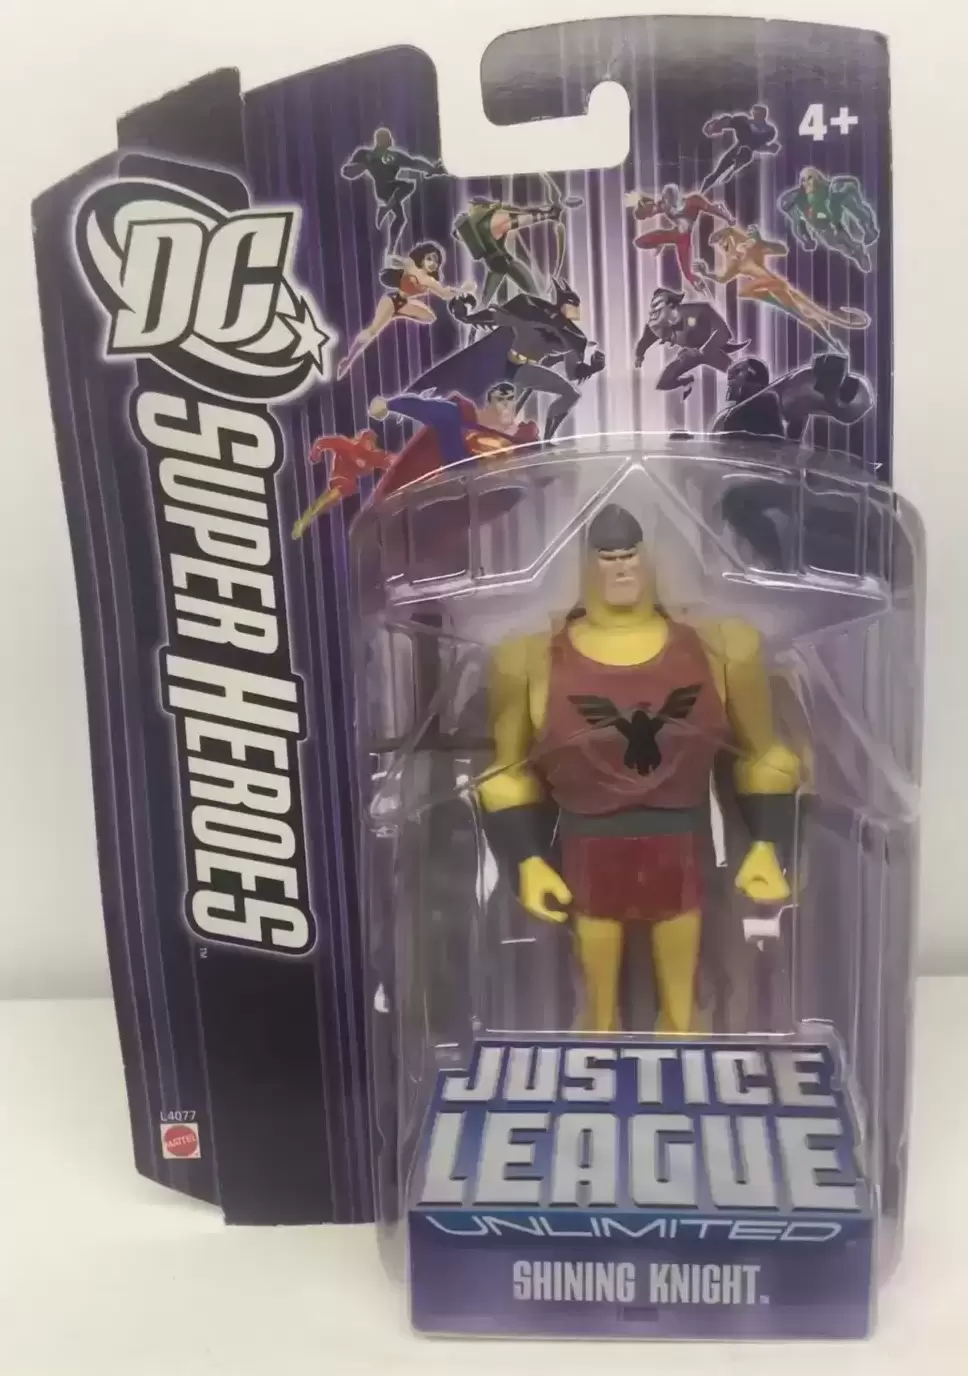 DC Super Heroes - Shining Knight - Justice League Unlimited